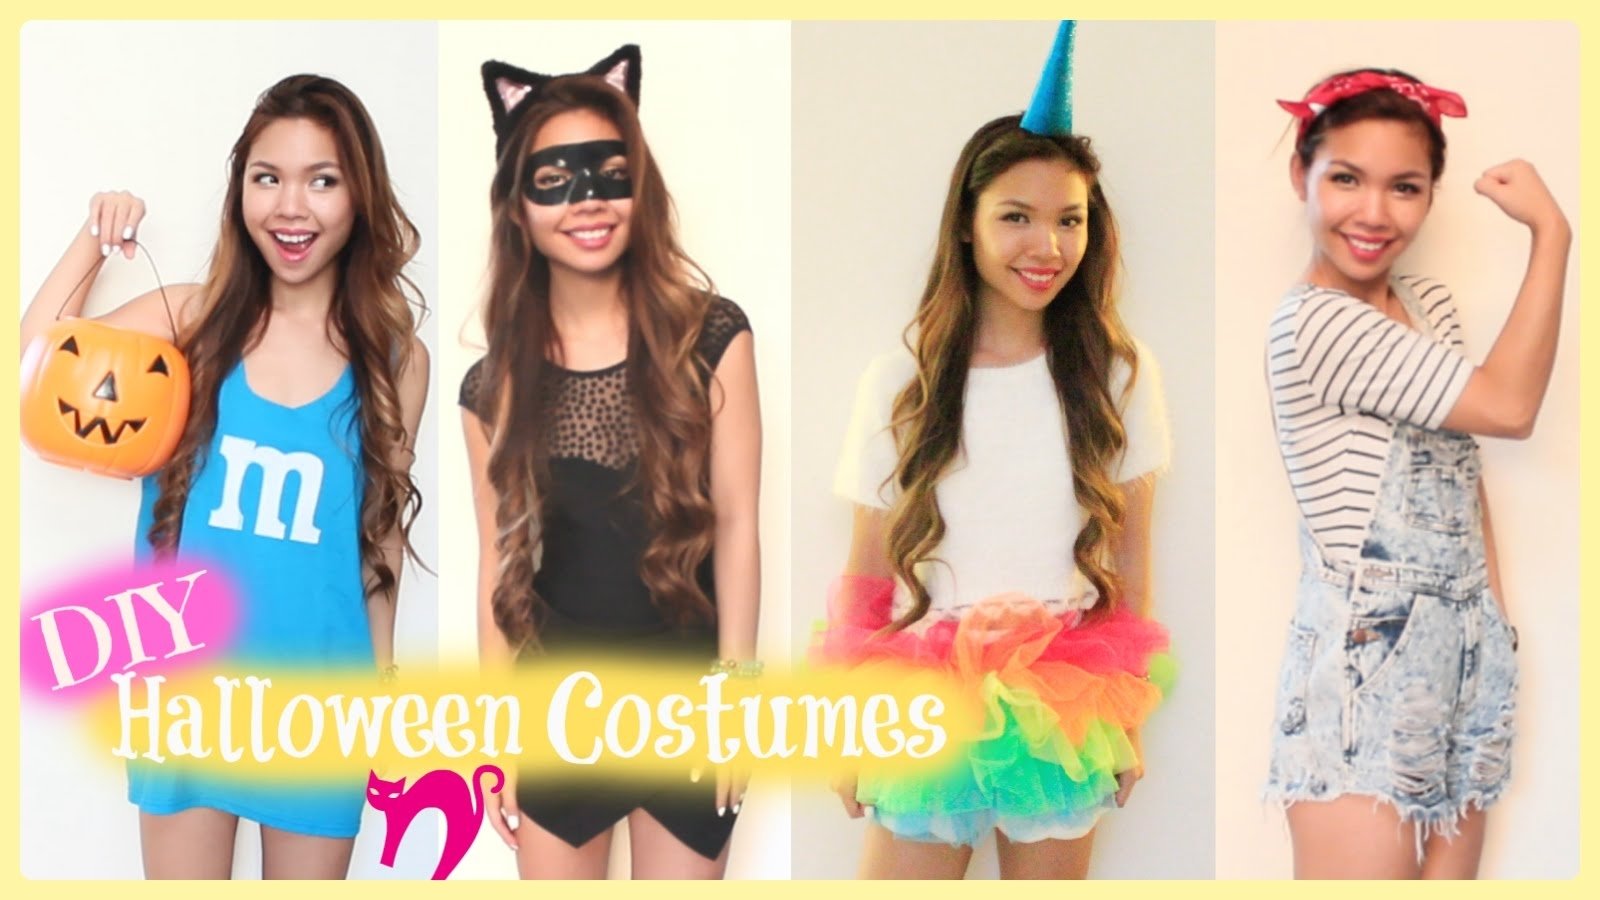 10 Fashionable Homemade Halloween Costume Ideas For Girls super easy last minute diy halloween costumes 2014 youtube 10 2023